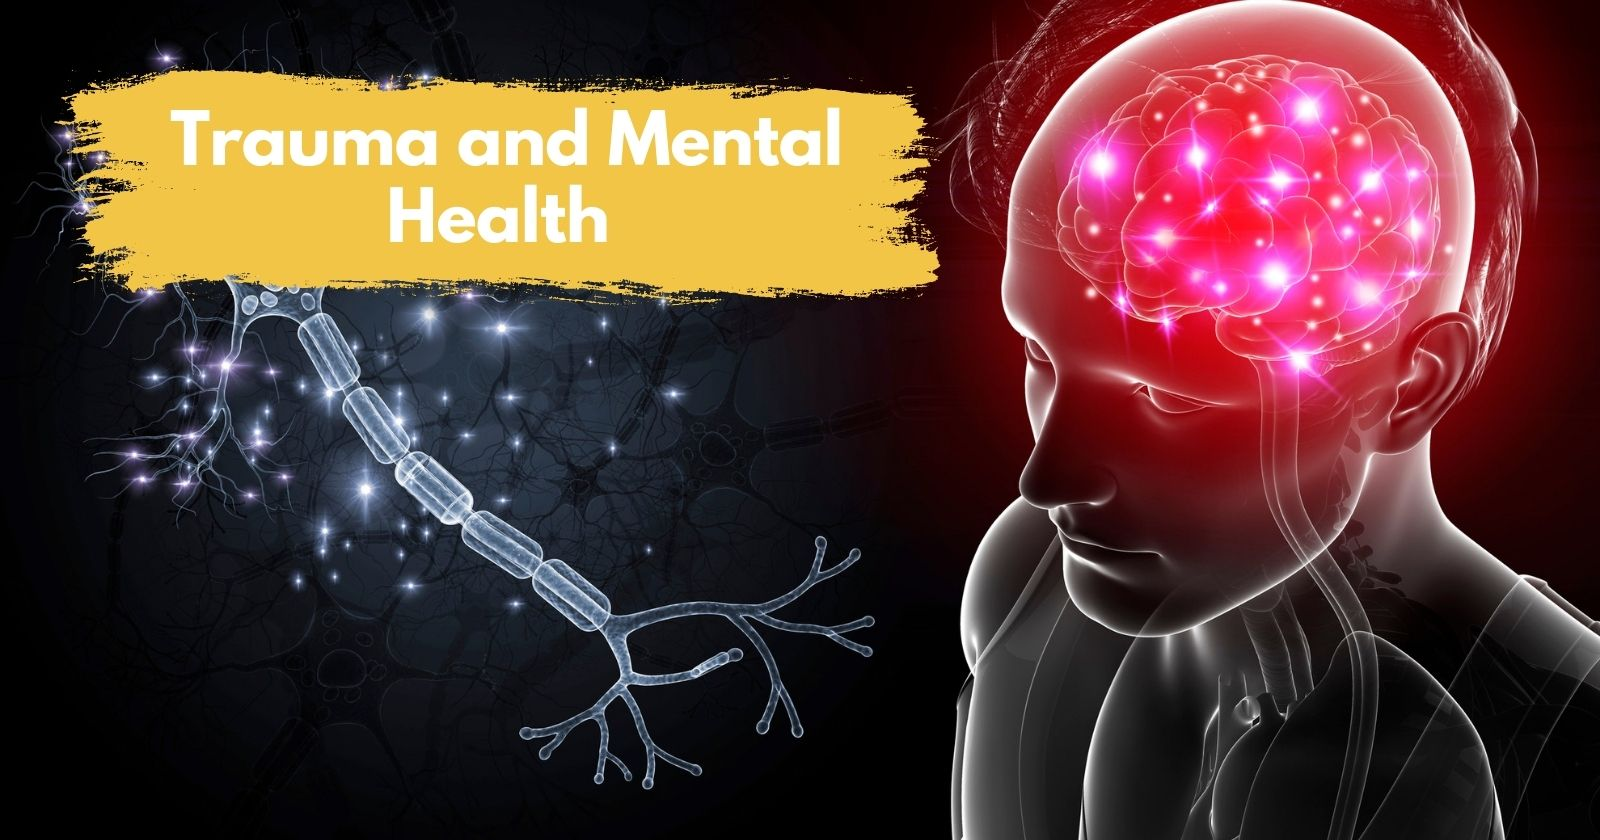 Trauma and Mental Health

Man Image with highlighted brain nerves